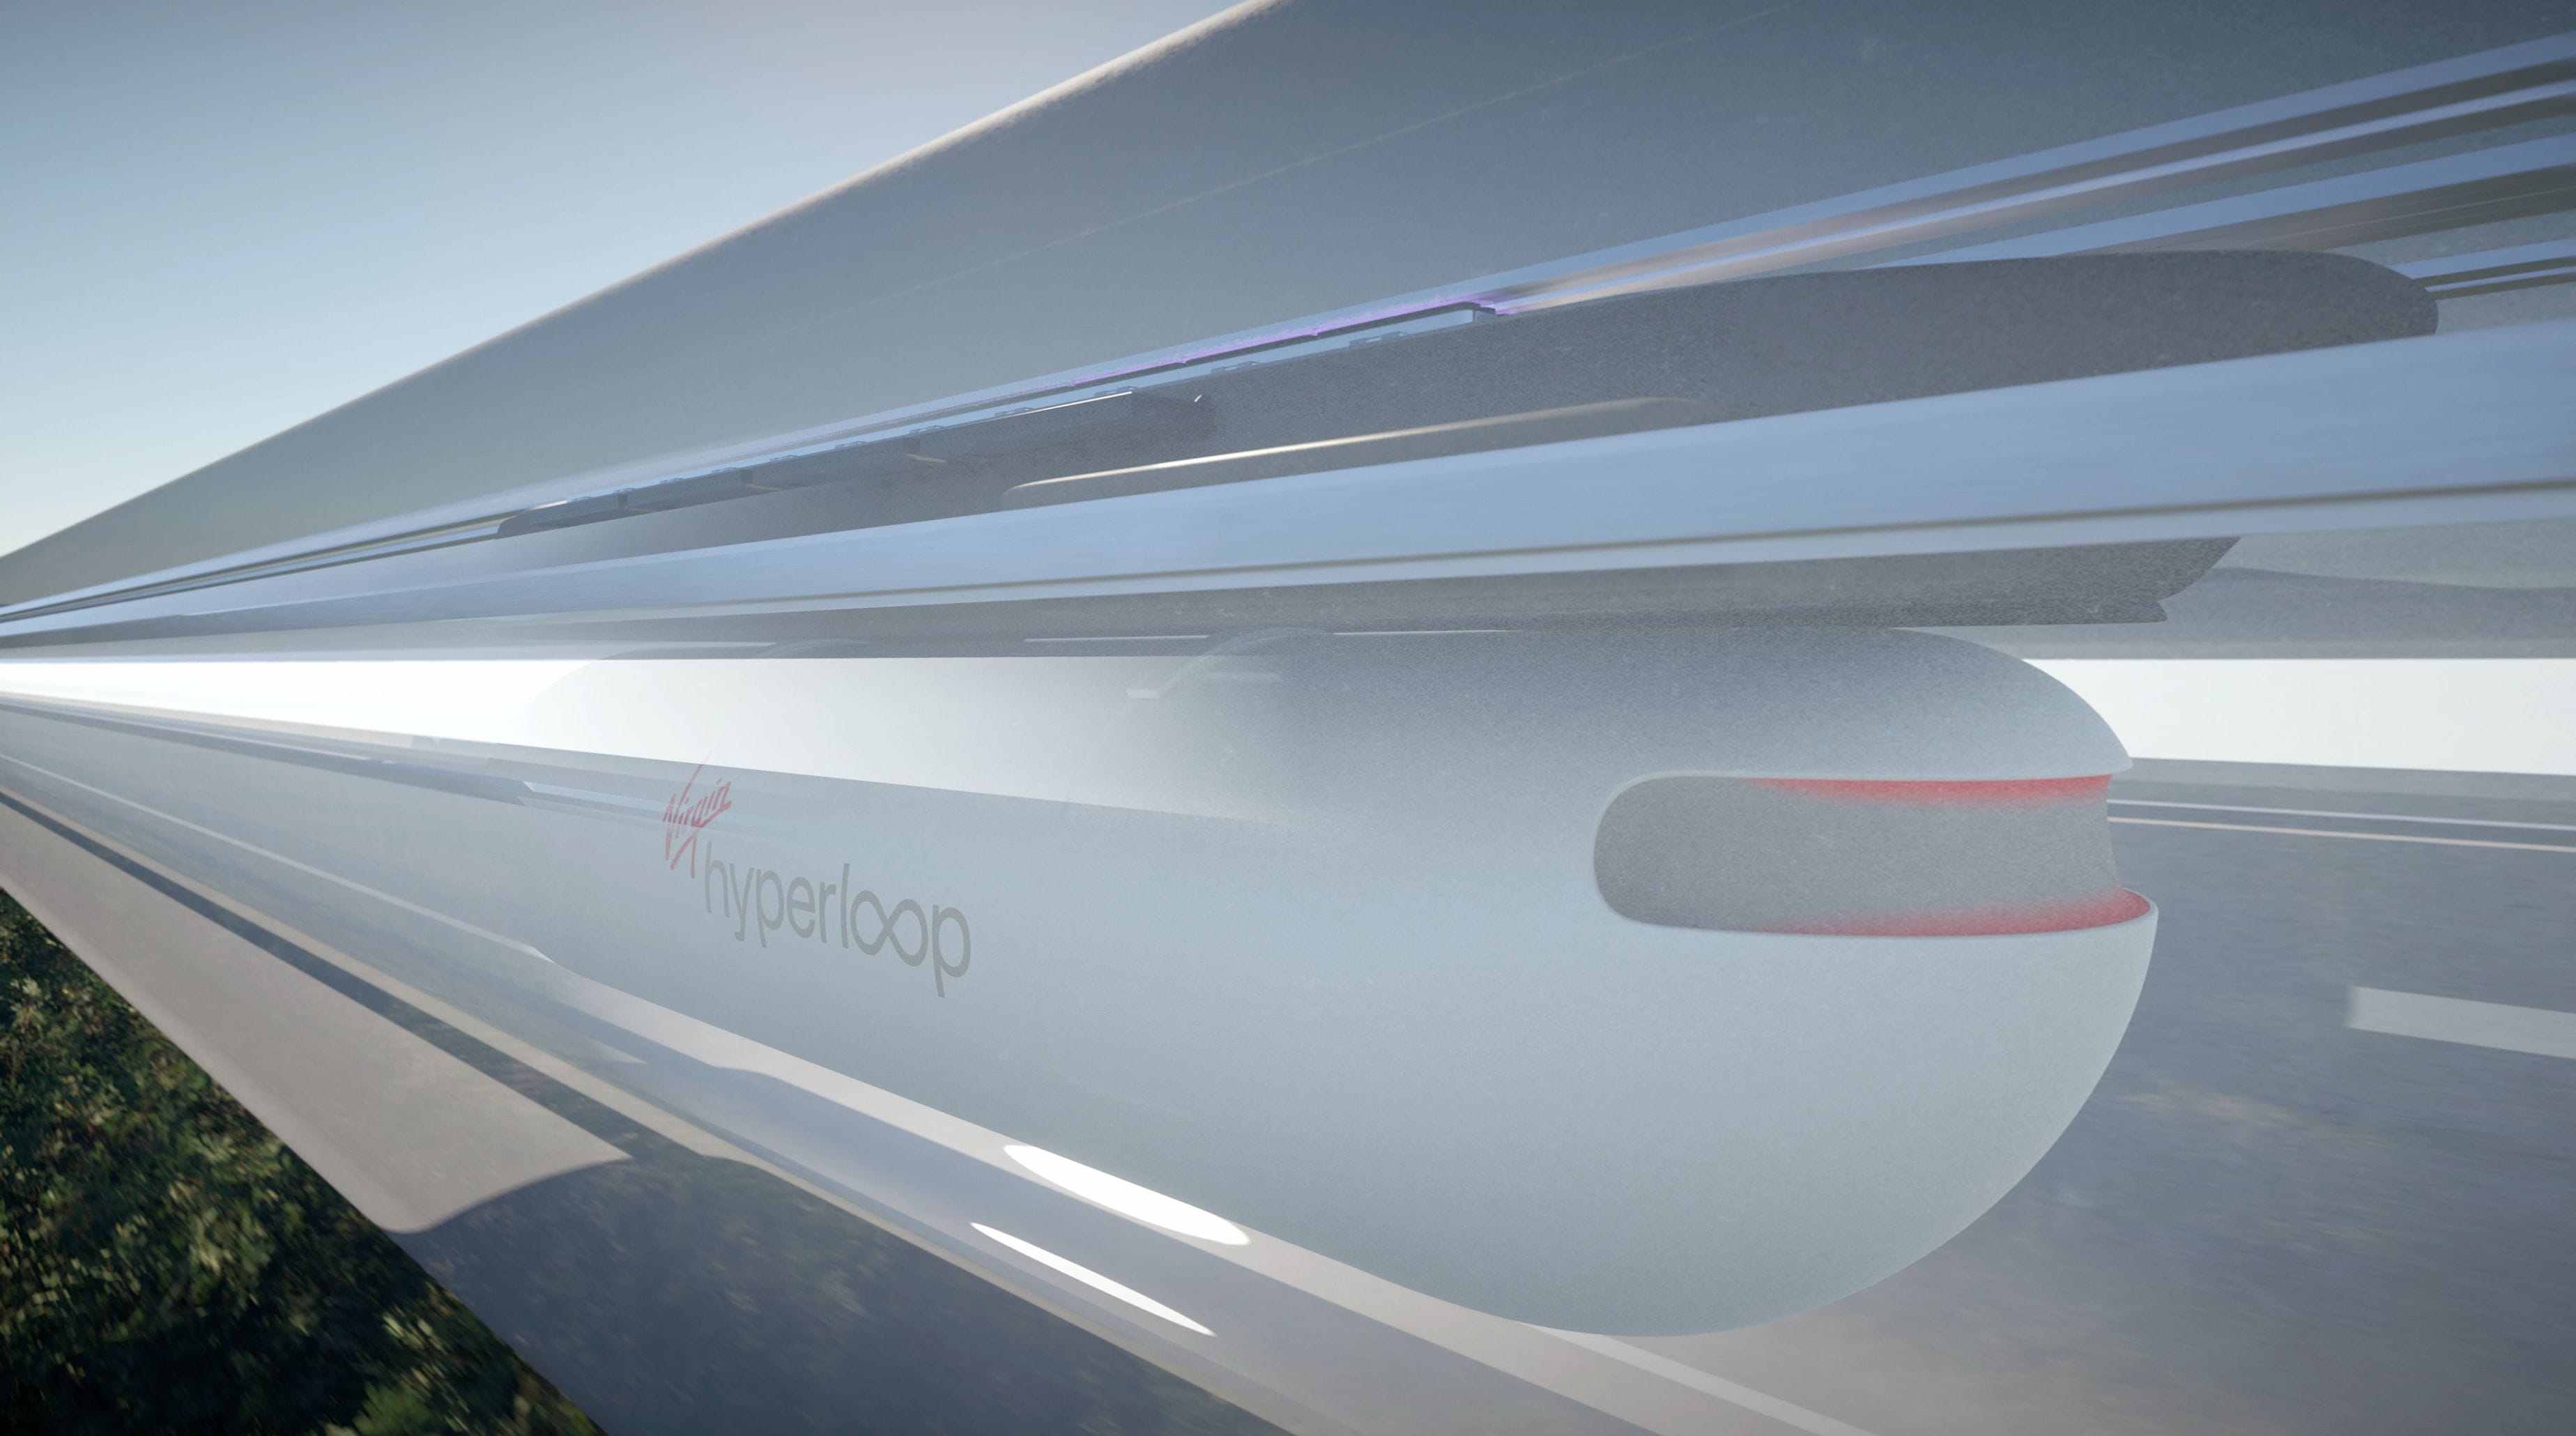 Will the 2020s be the decade of hyperloop?